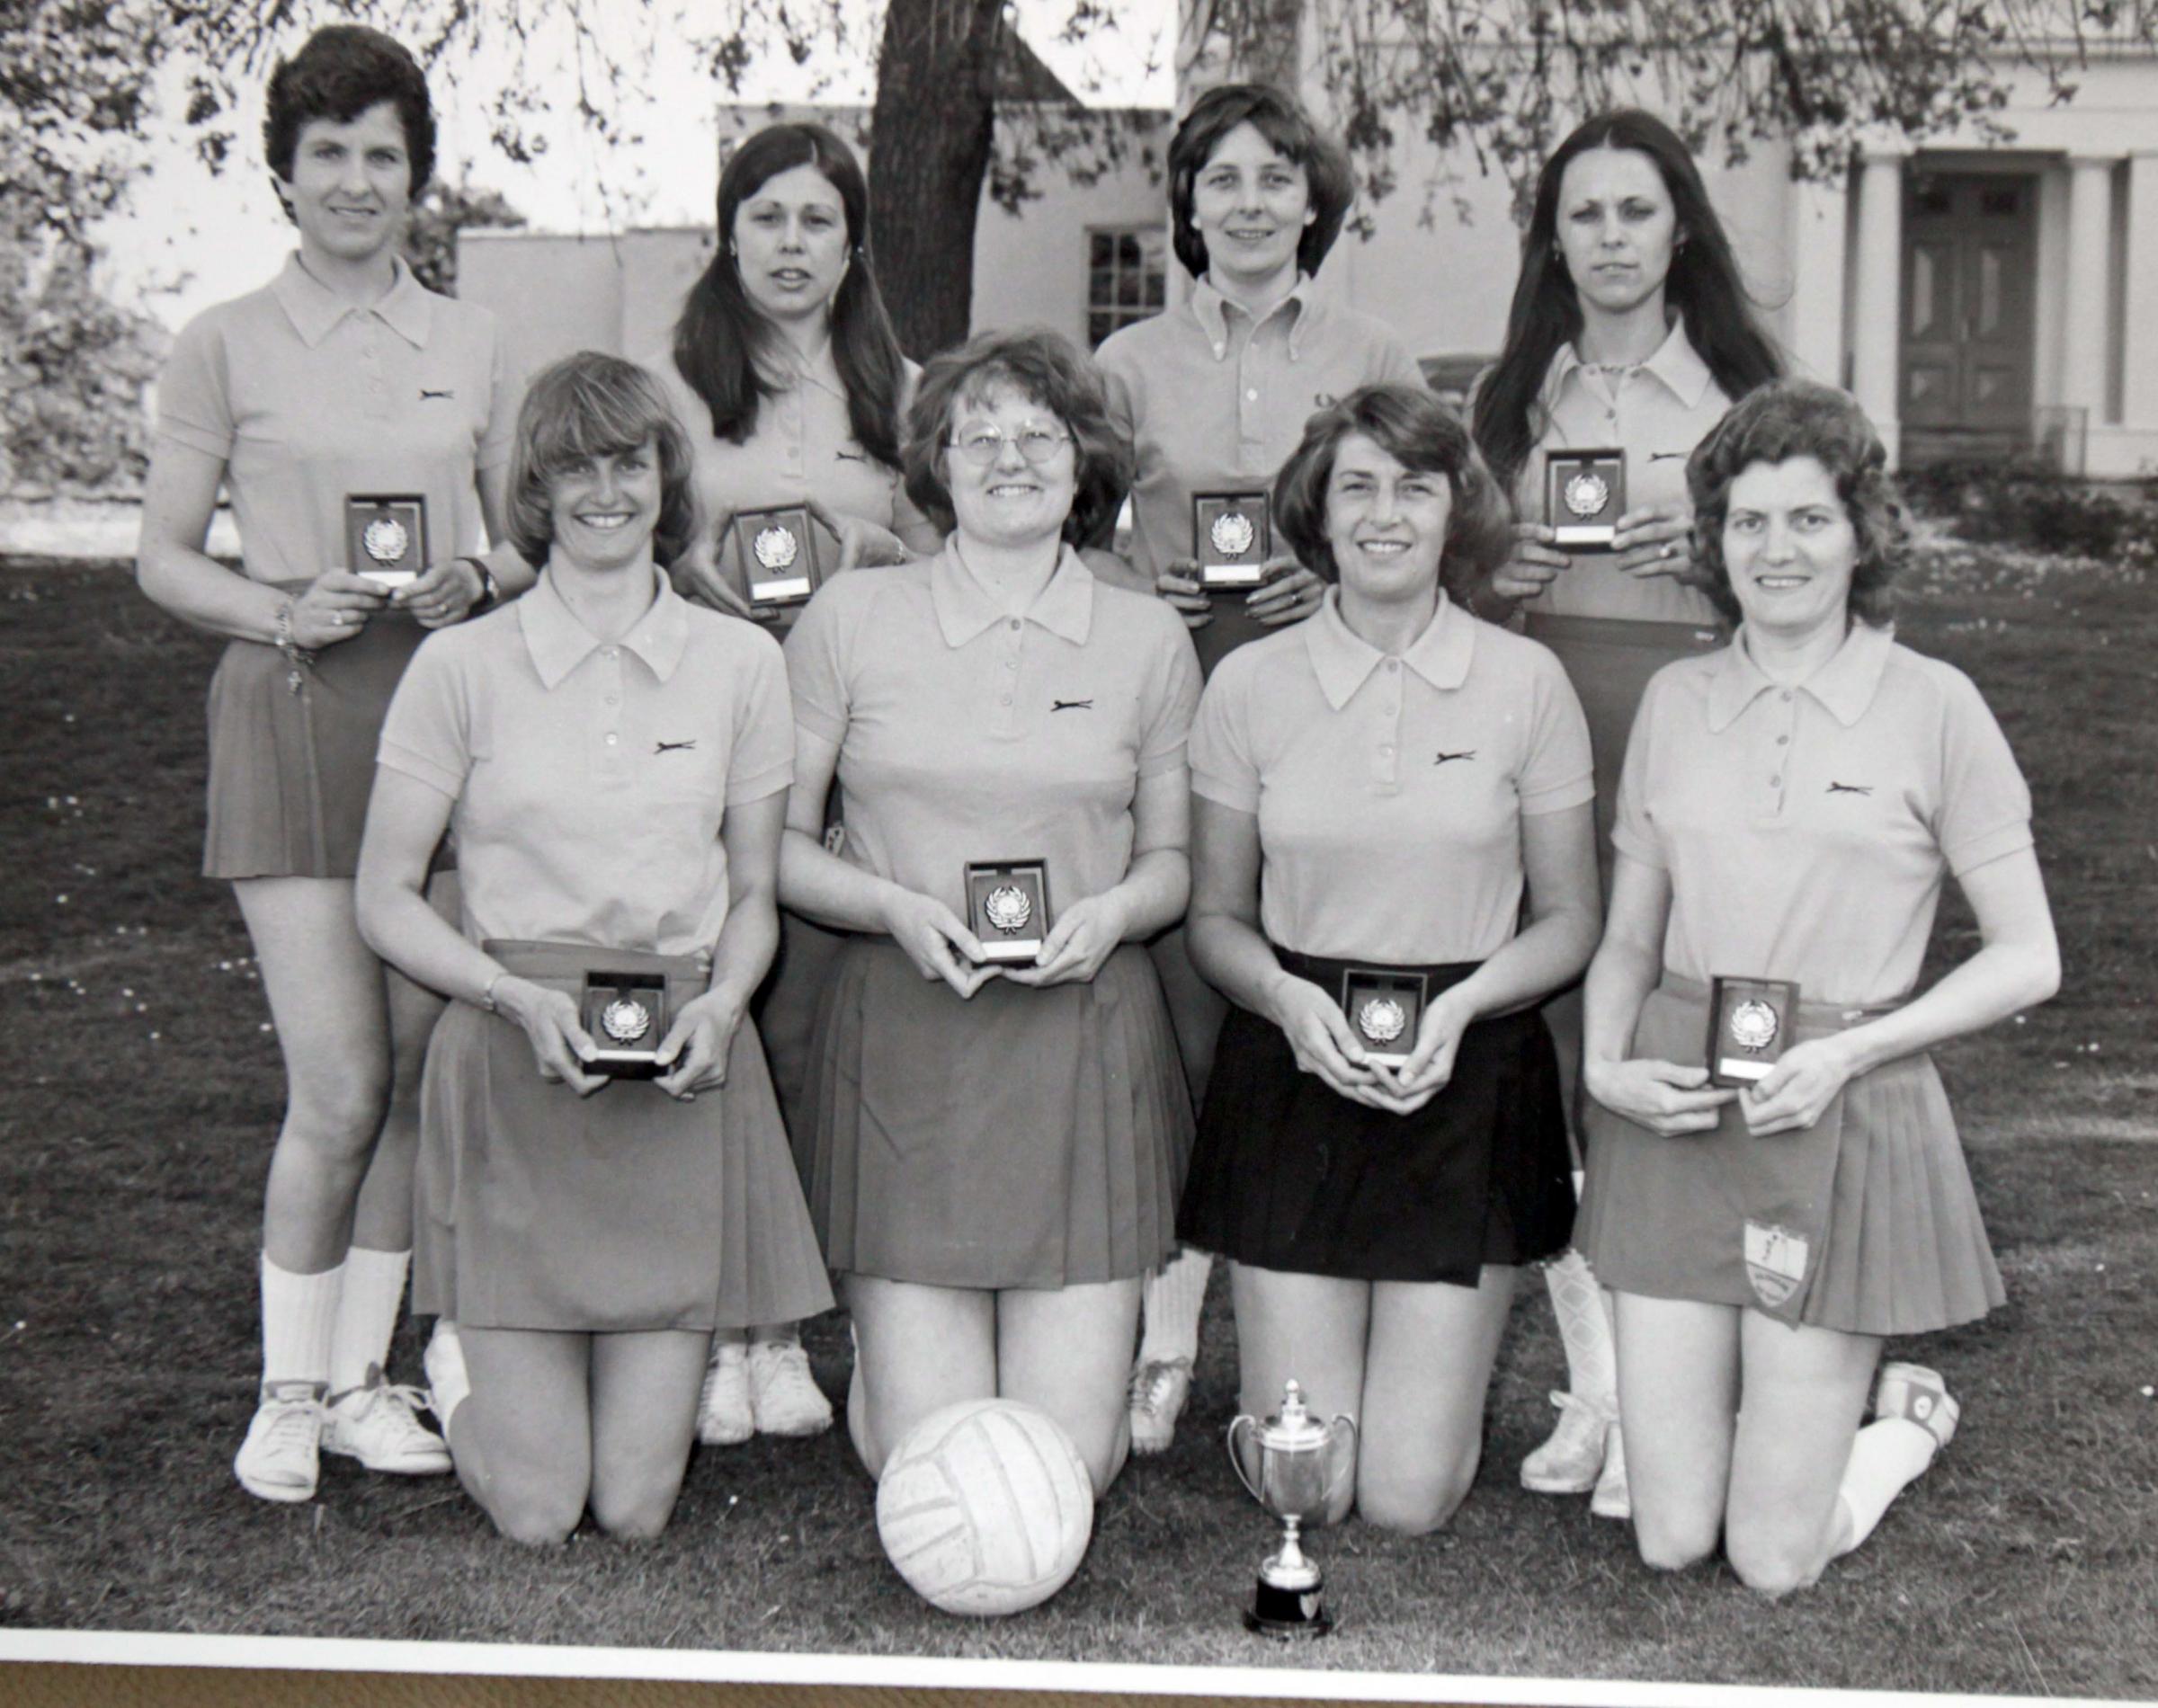 nigel brown Brenda Clow was pictured in our Blast From the Past feature on Monday - picture of 1980 Paxmans Netball Club team, on Friday at Colchester Road, Wivenhoe.Brenda on left in copy pic